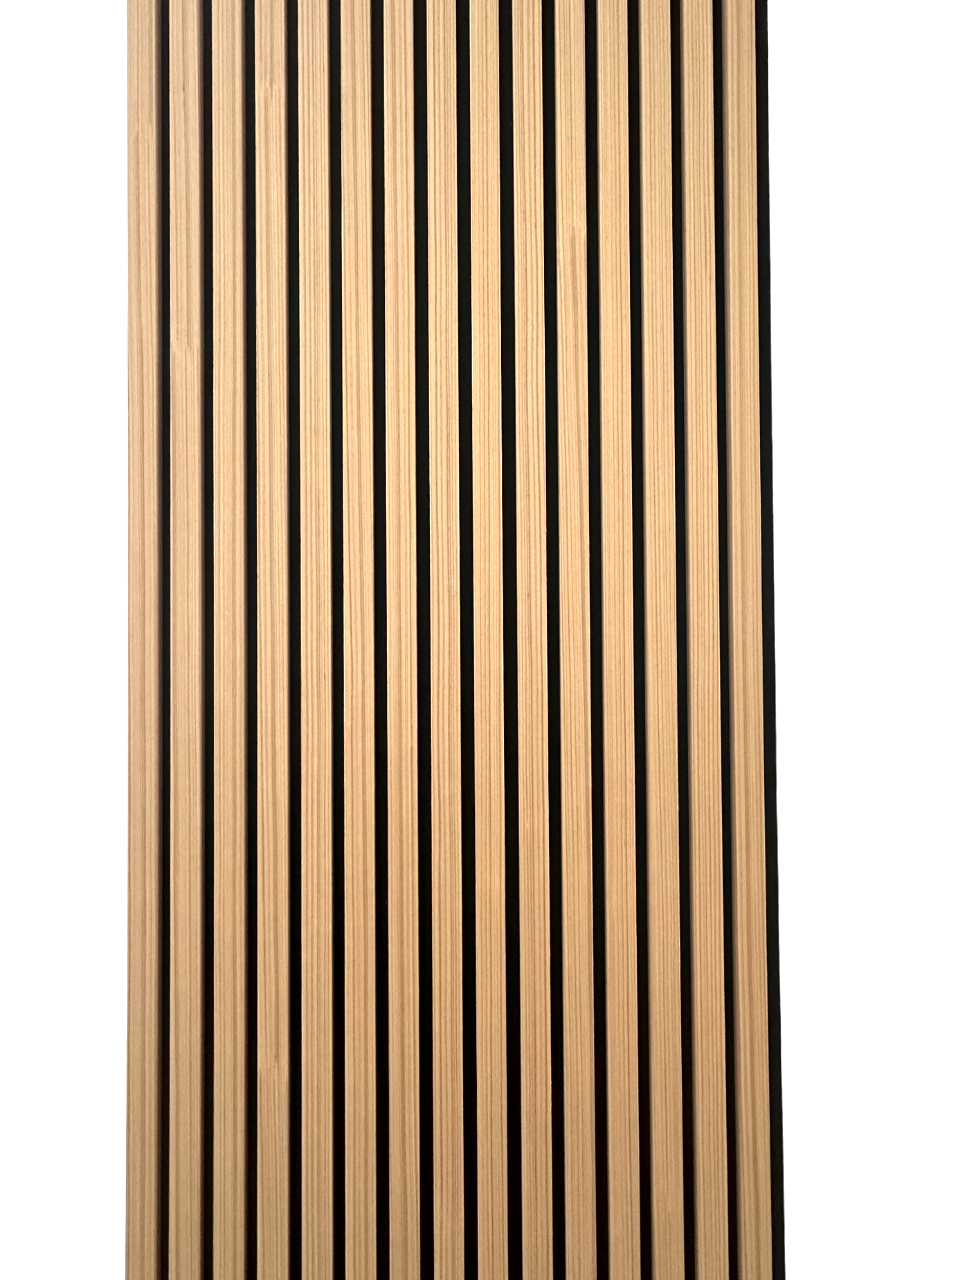 Acoustic Wood Panels Accent Wall Panels Light Brown Accent Slat Wall Decor 2 ft wide by 8 ft long